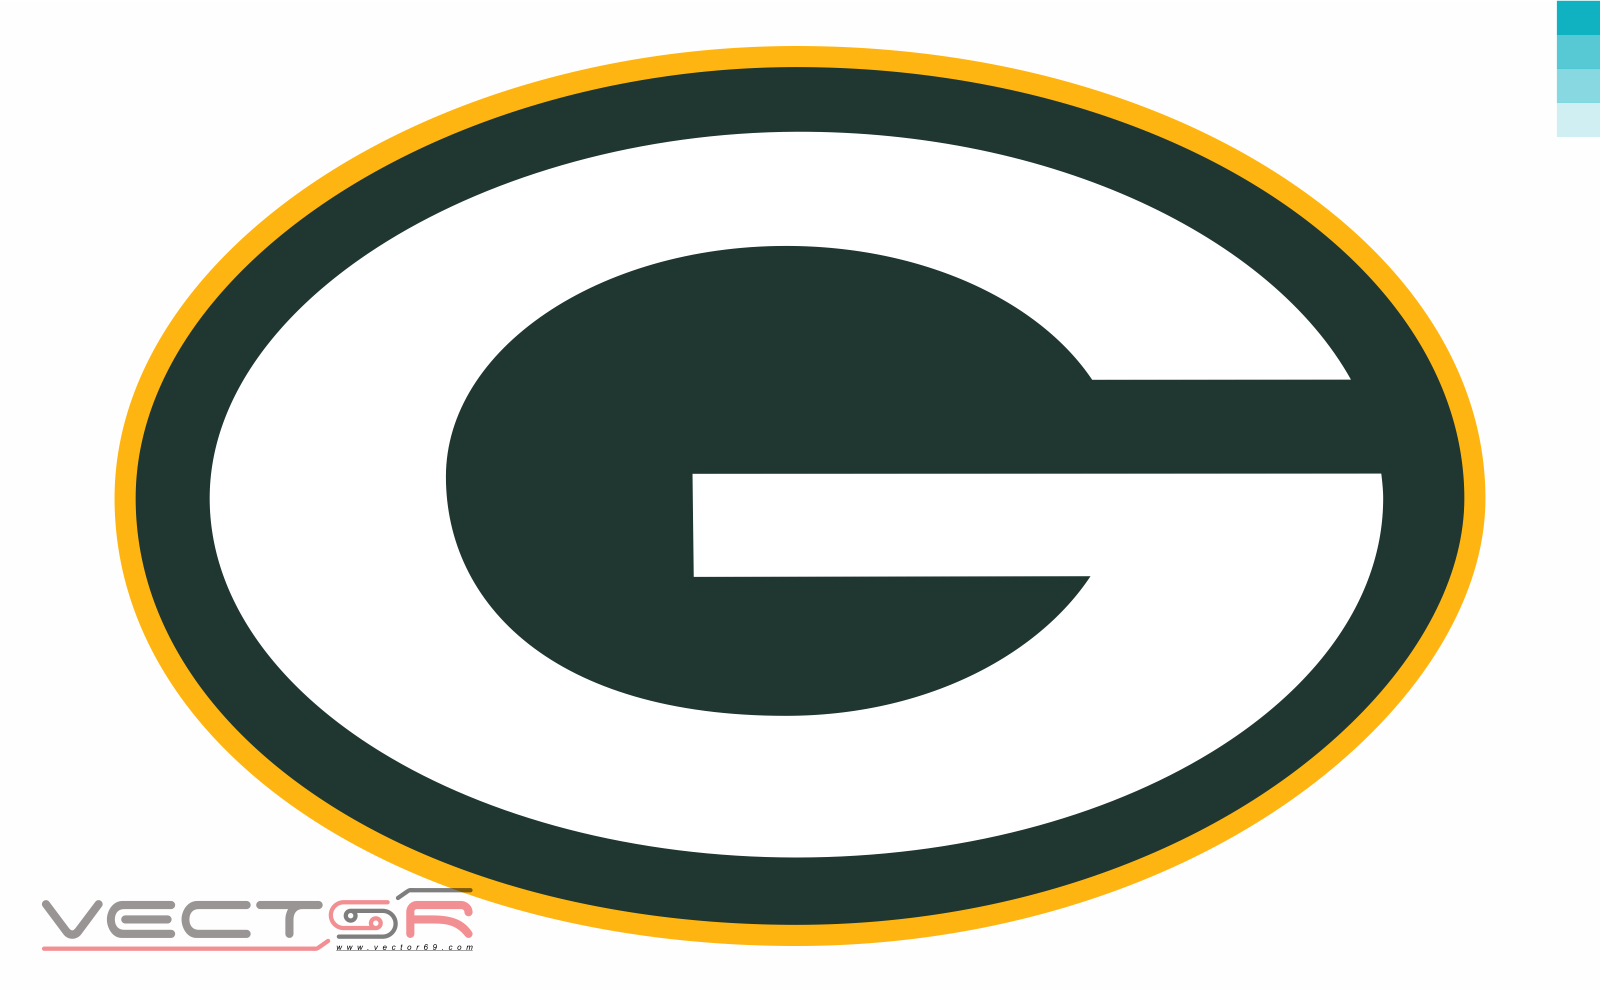 Green Bay Packers 1980 Logo - Download Vector File SVG (Scalable Vector Graphics)